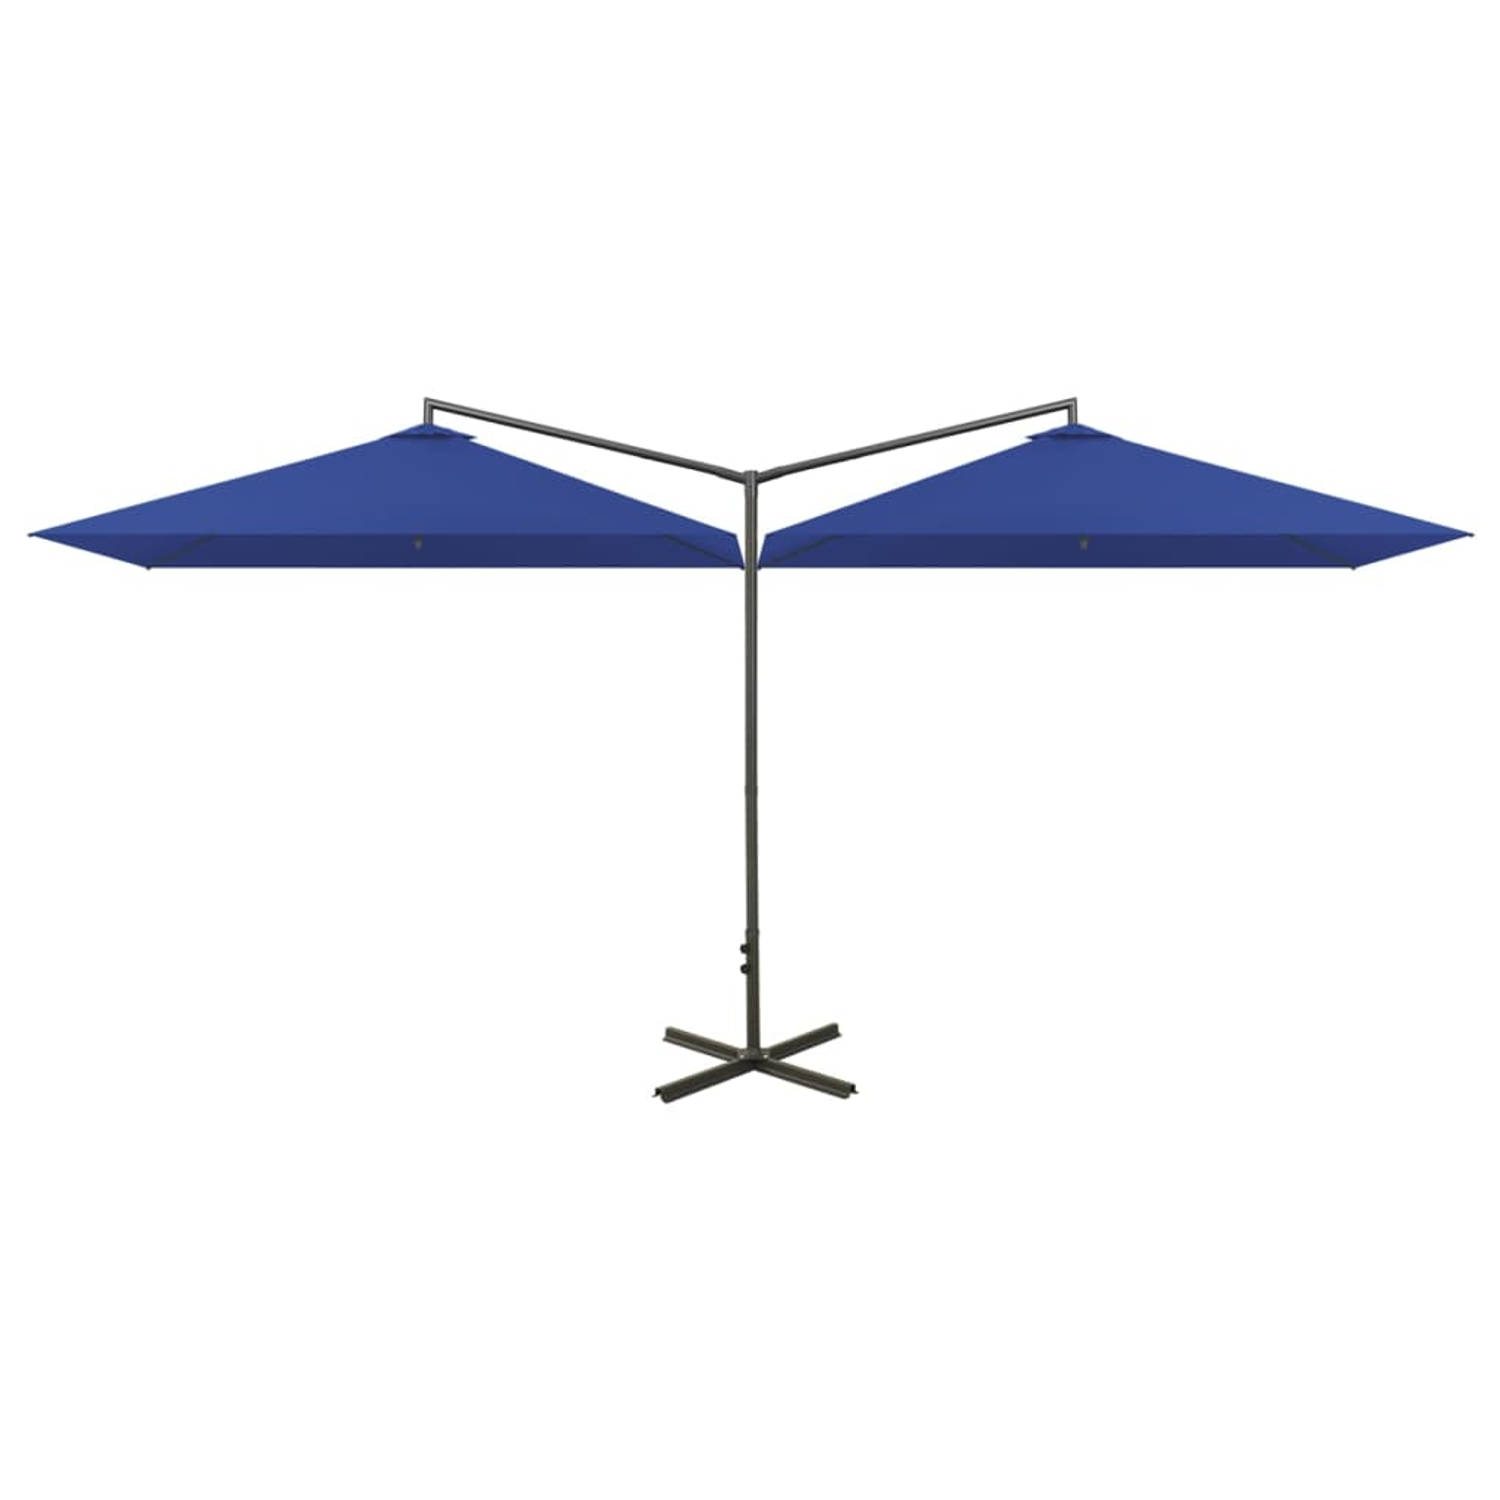 The Living Store Dubbele Parasol Polyester - 290x290 cm - Stalen paal - Azuurblauw